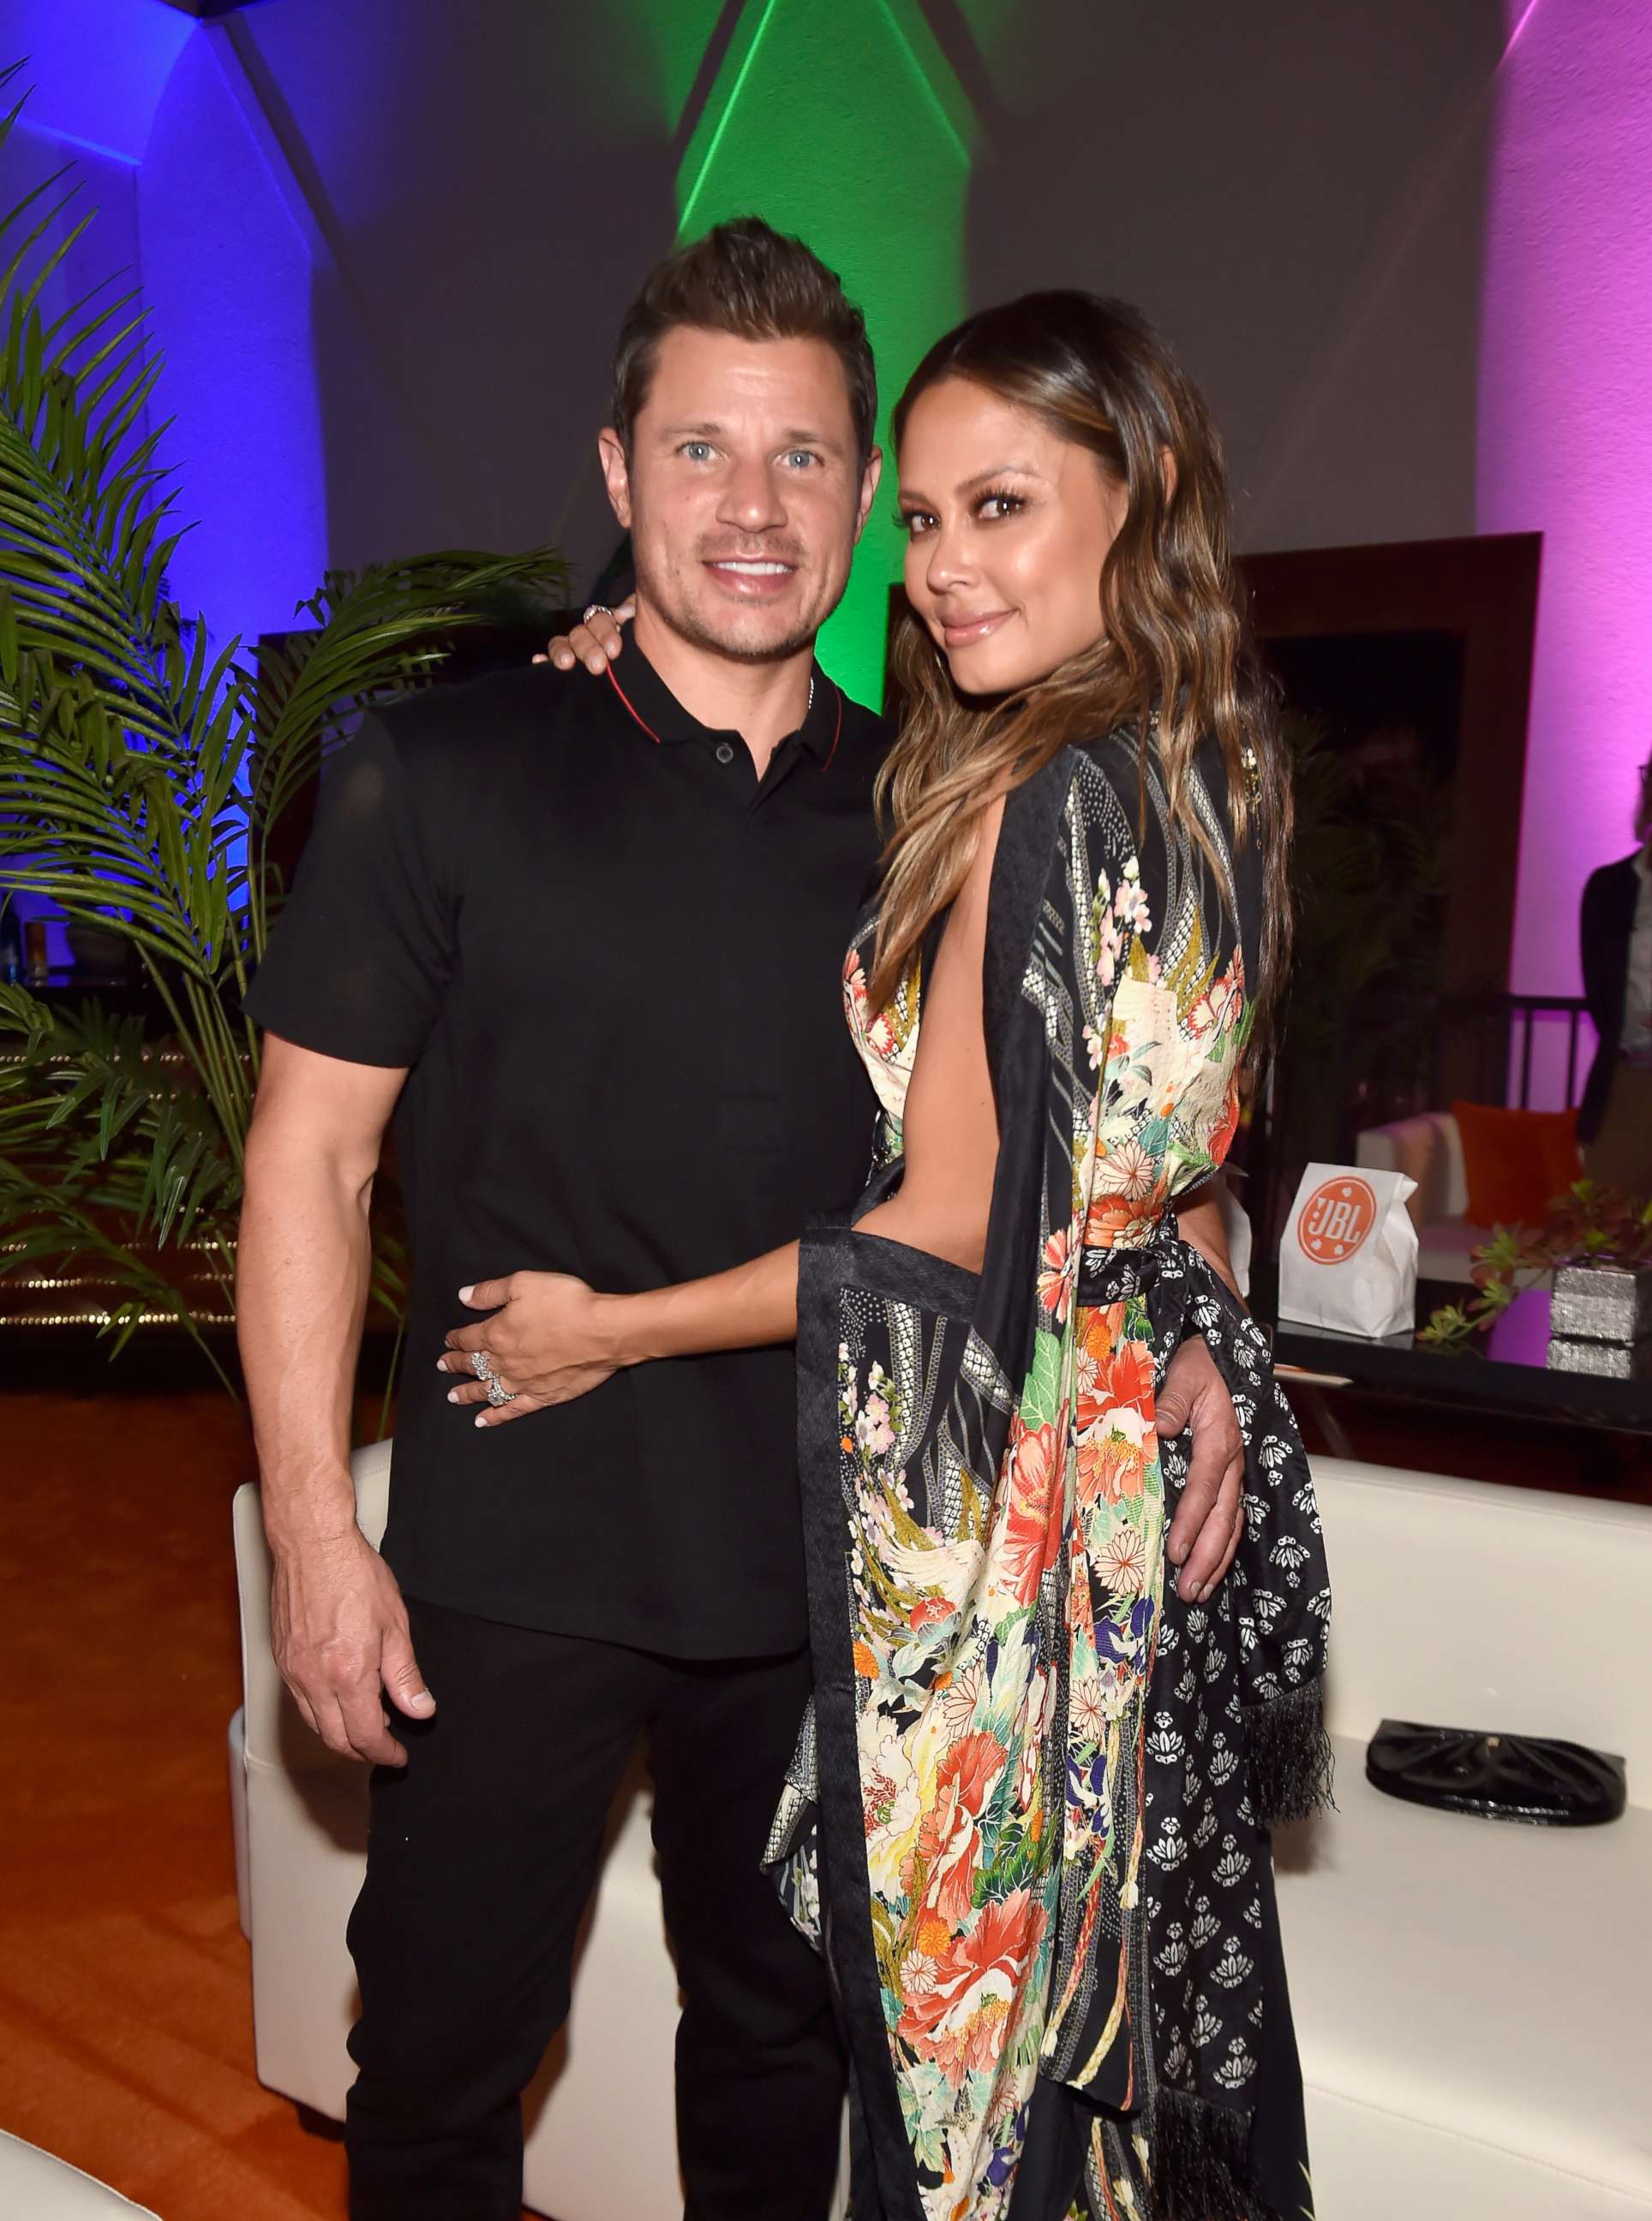 PHOTO: Nick Lachey and Vanessa Lachey attending JBL Fest, an exclusive, three-day music experience hosted by JBL in Las Vegas, Oct. 19, 2018.